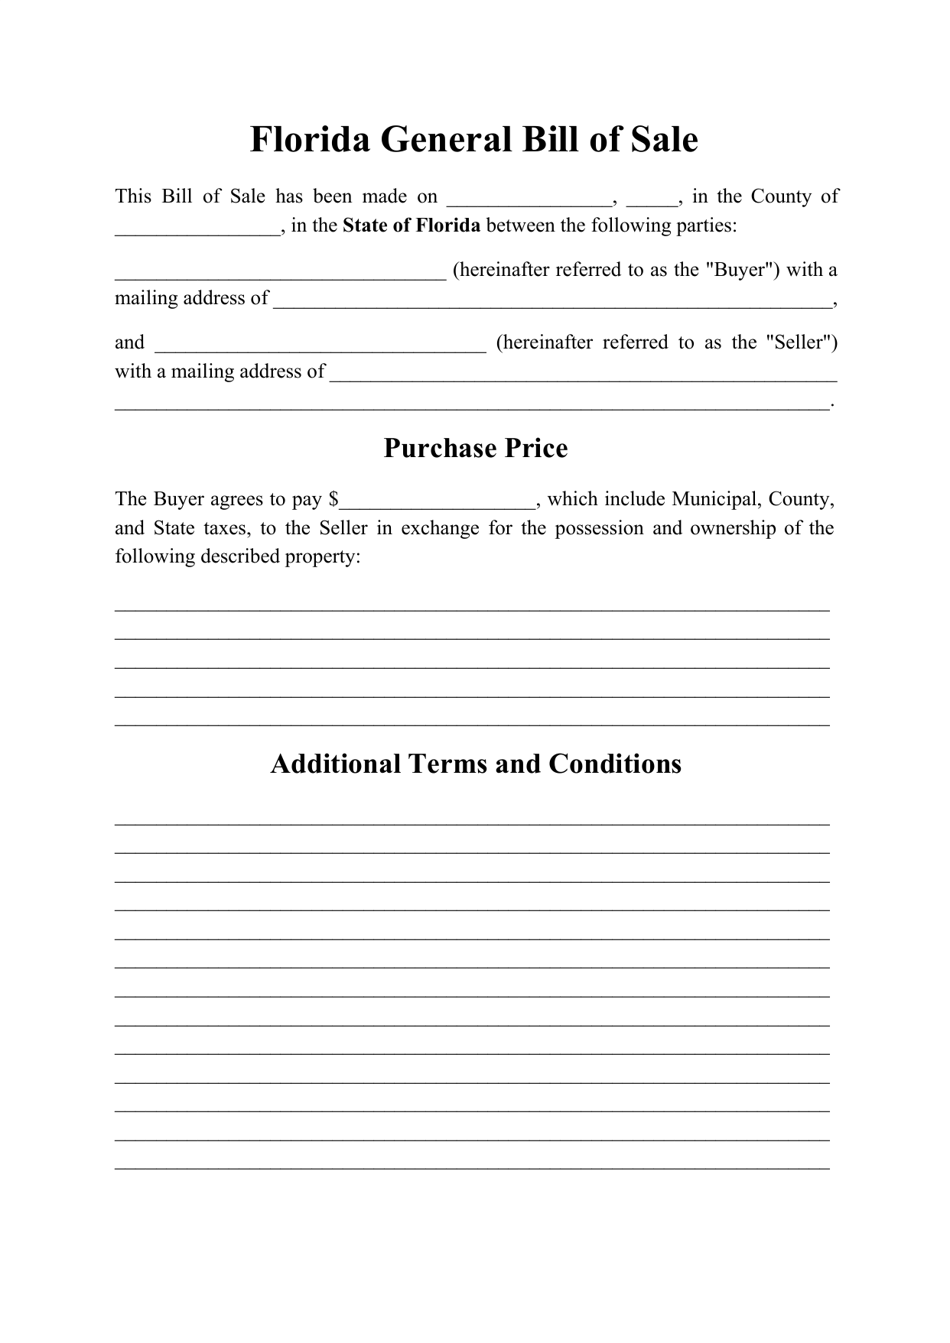 free-bill-of-sale-florida-template